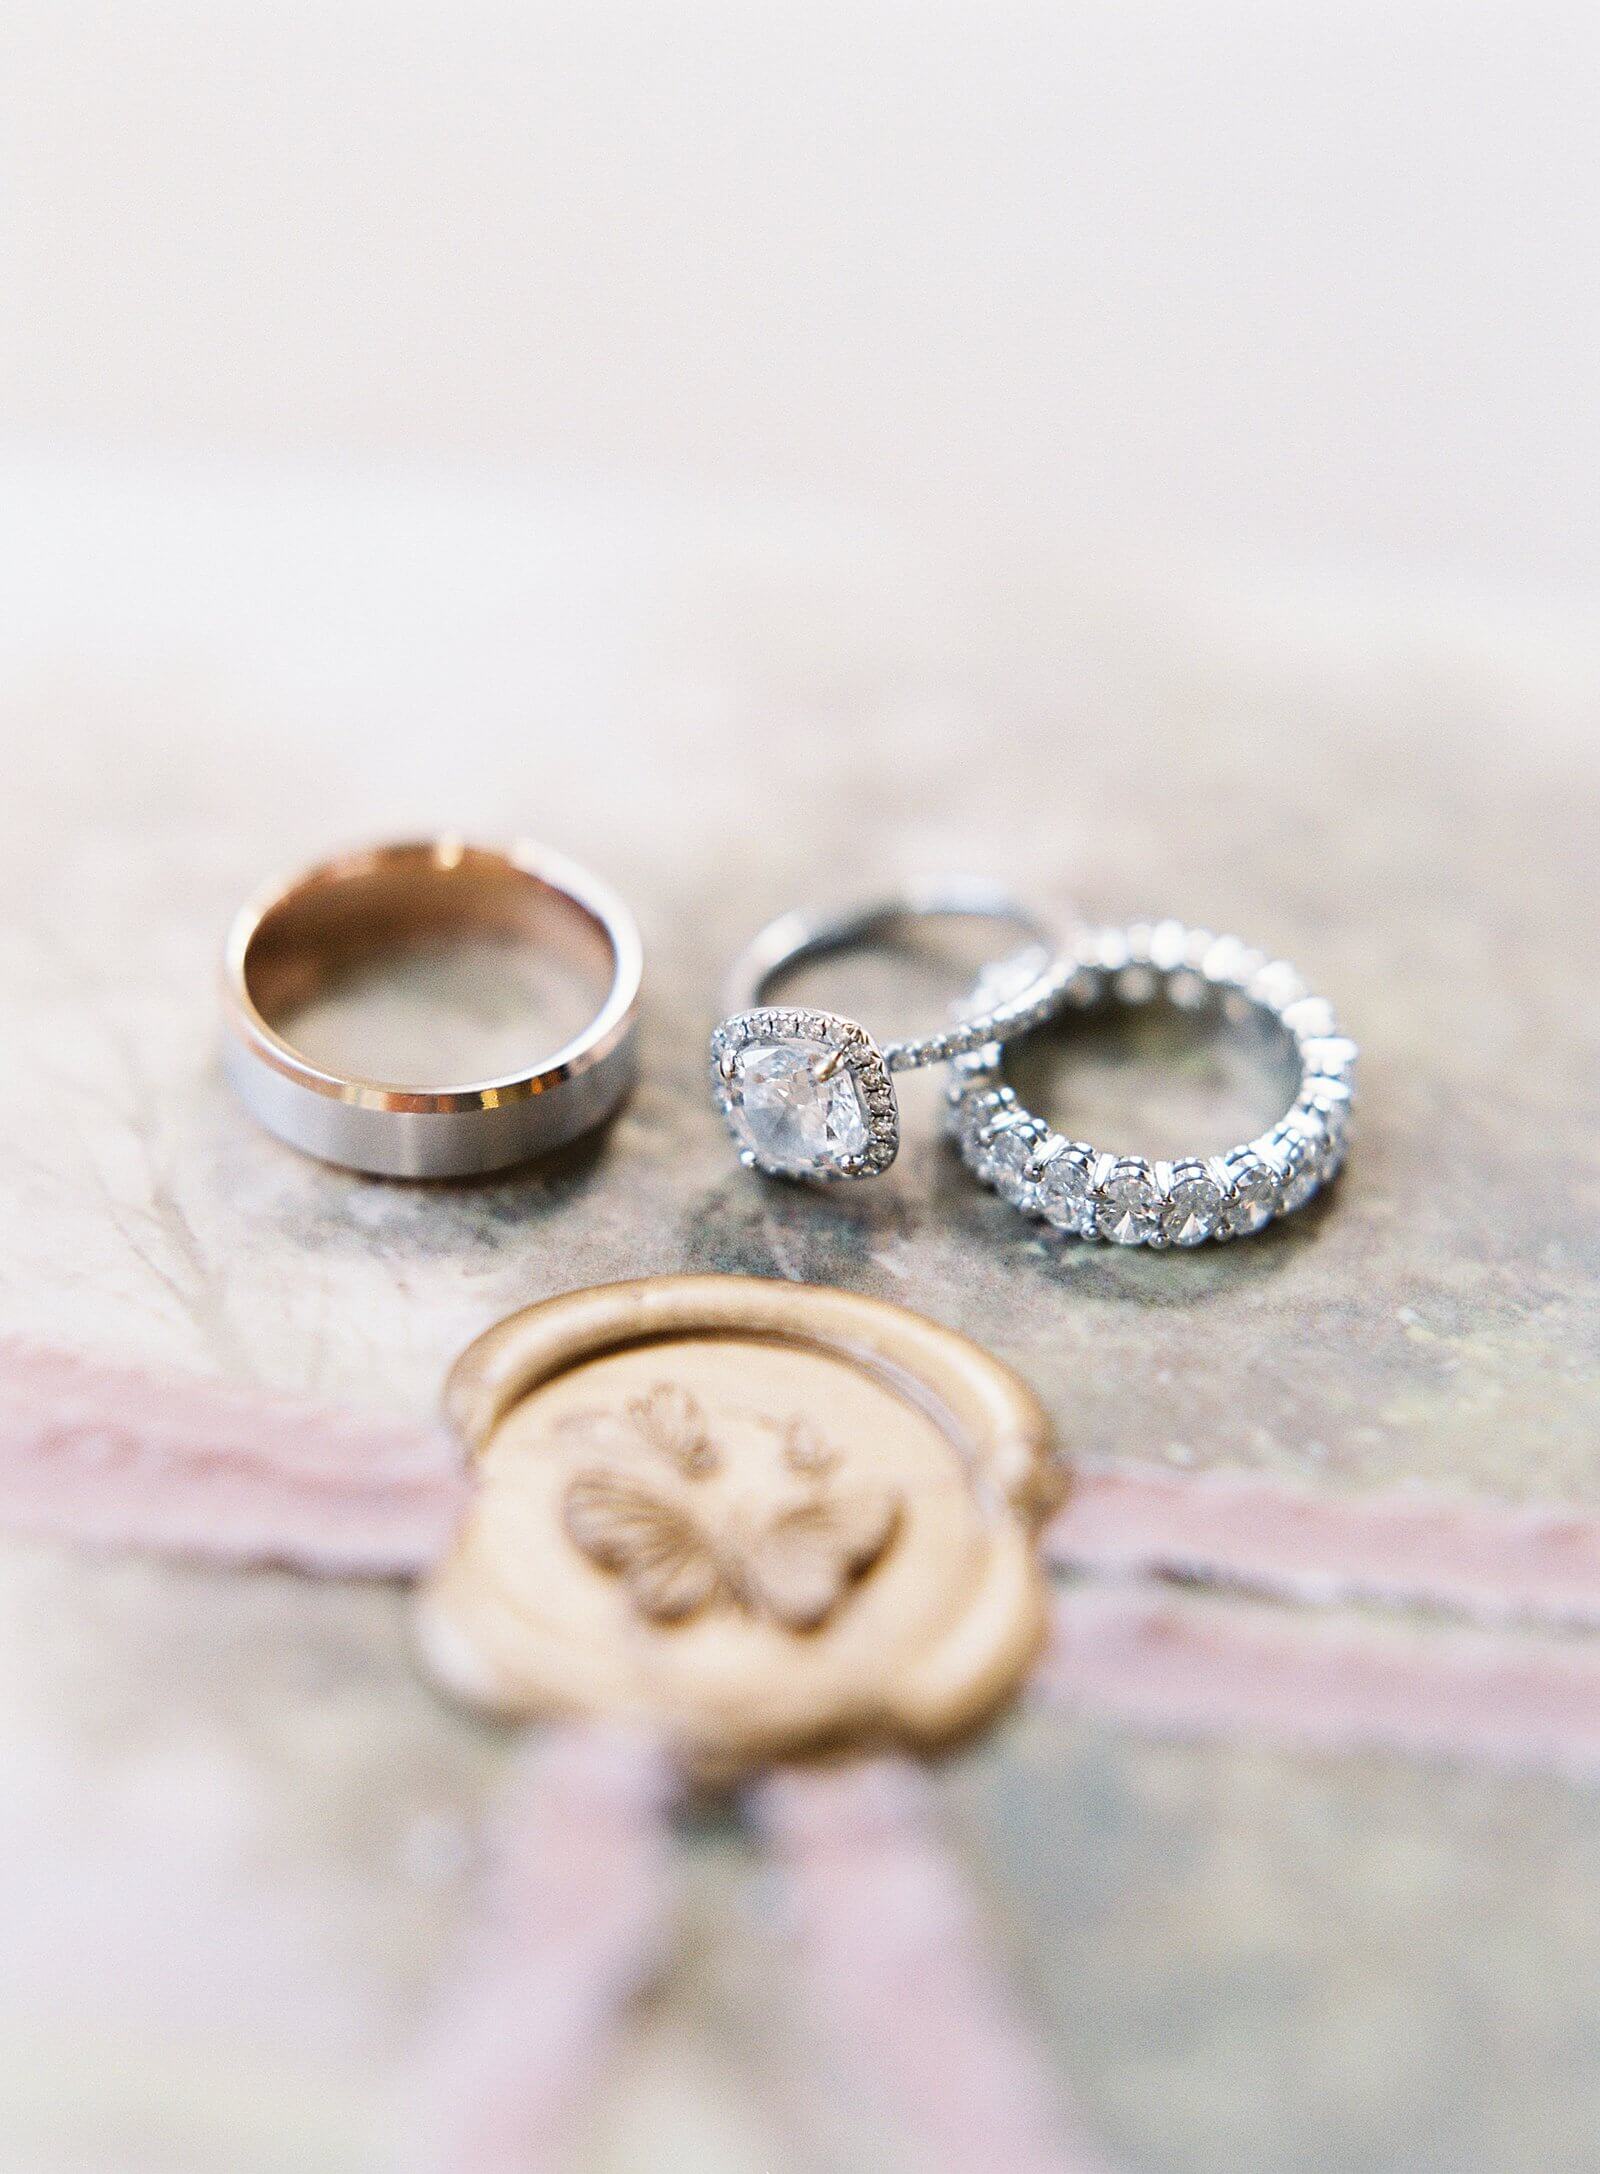 Wedding rings on romantic wedding stationary with bridal details - Jacqueline Benét Photography